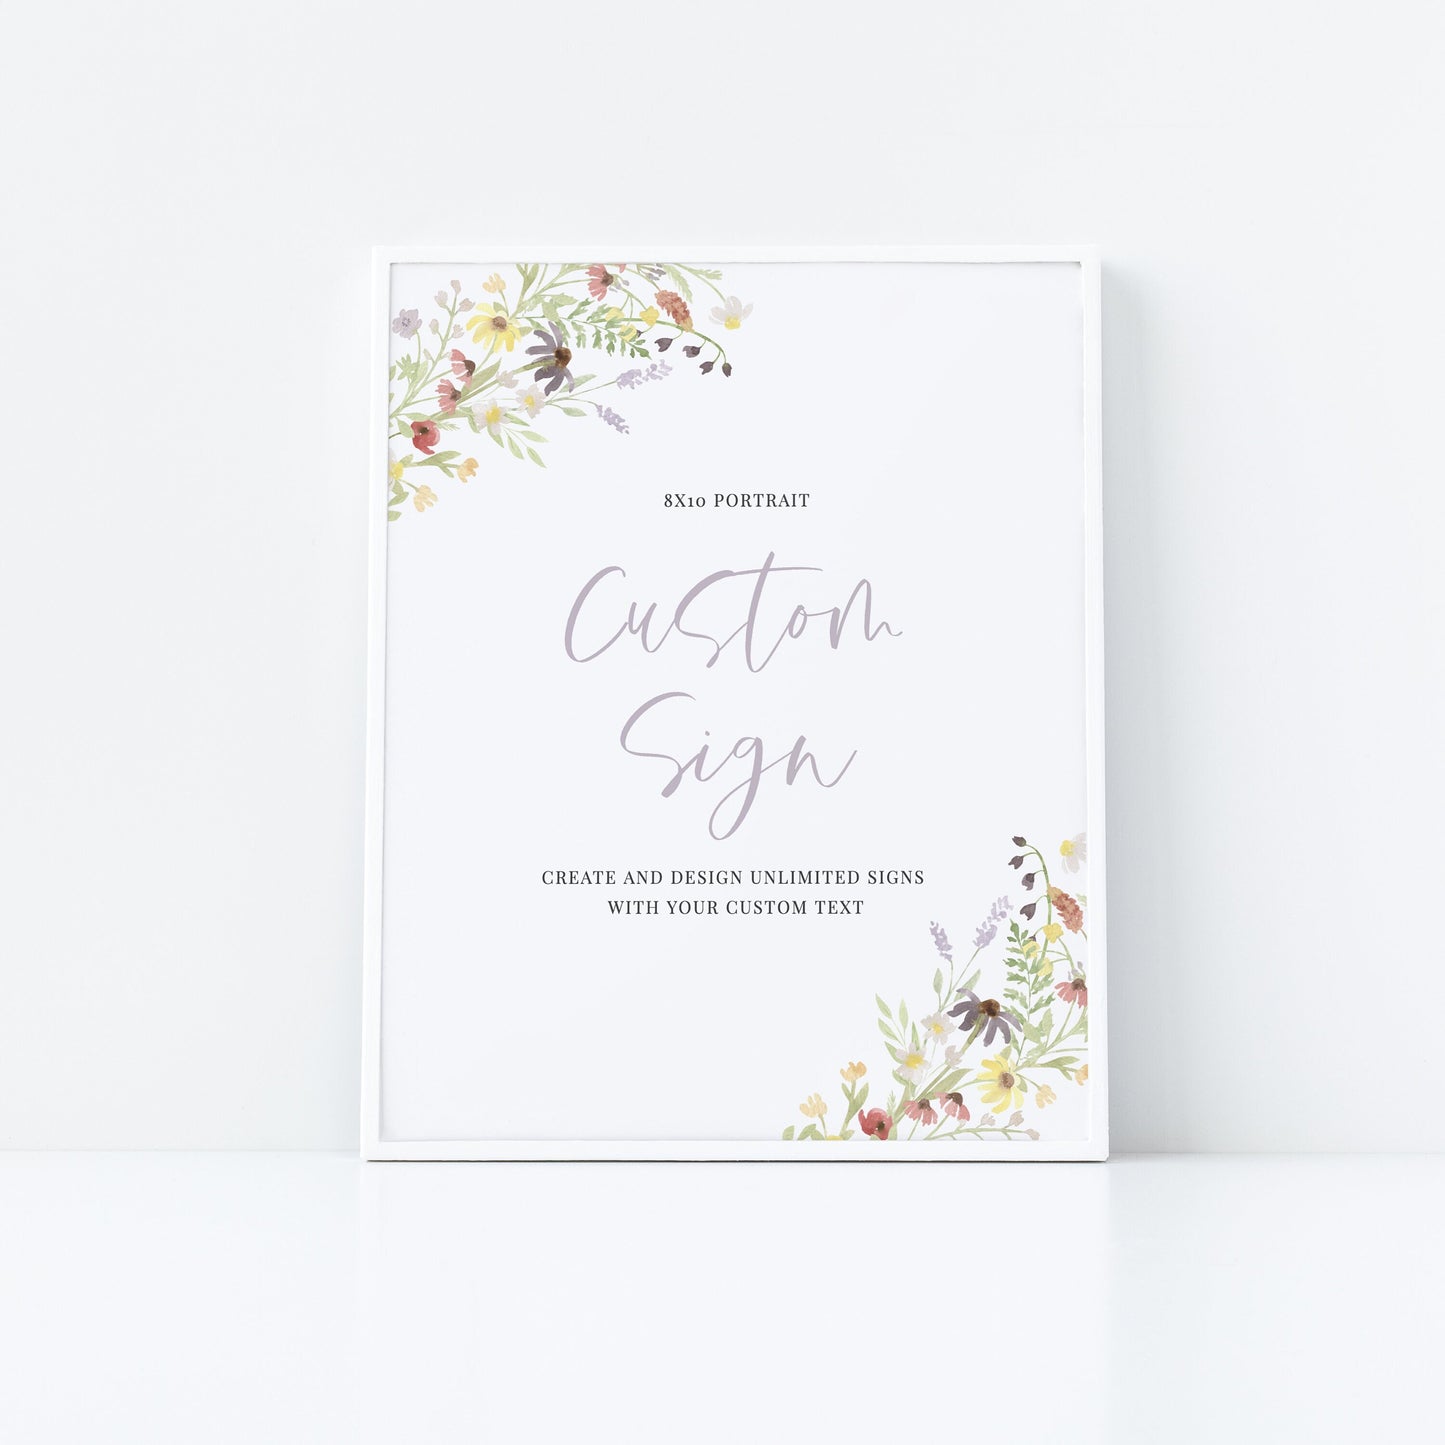 Editable Custom Wedding Sign Floral Bridal Shower Sign Kit Create Unlimited Signs 8x10 and 10x8 Template